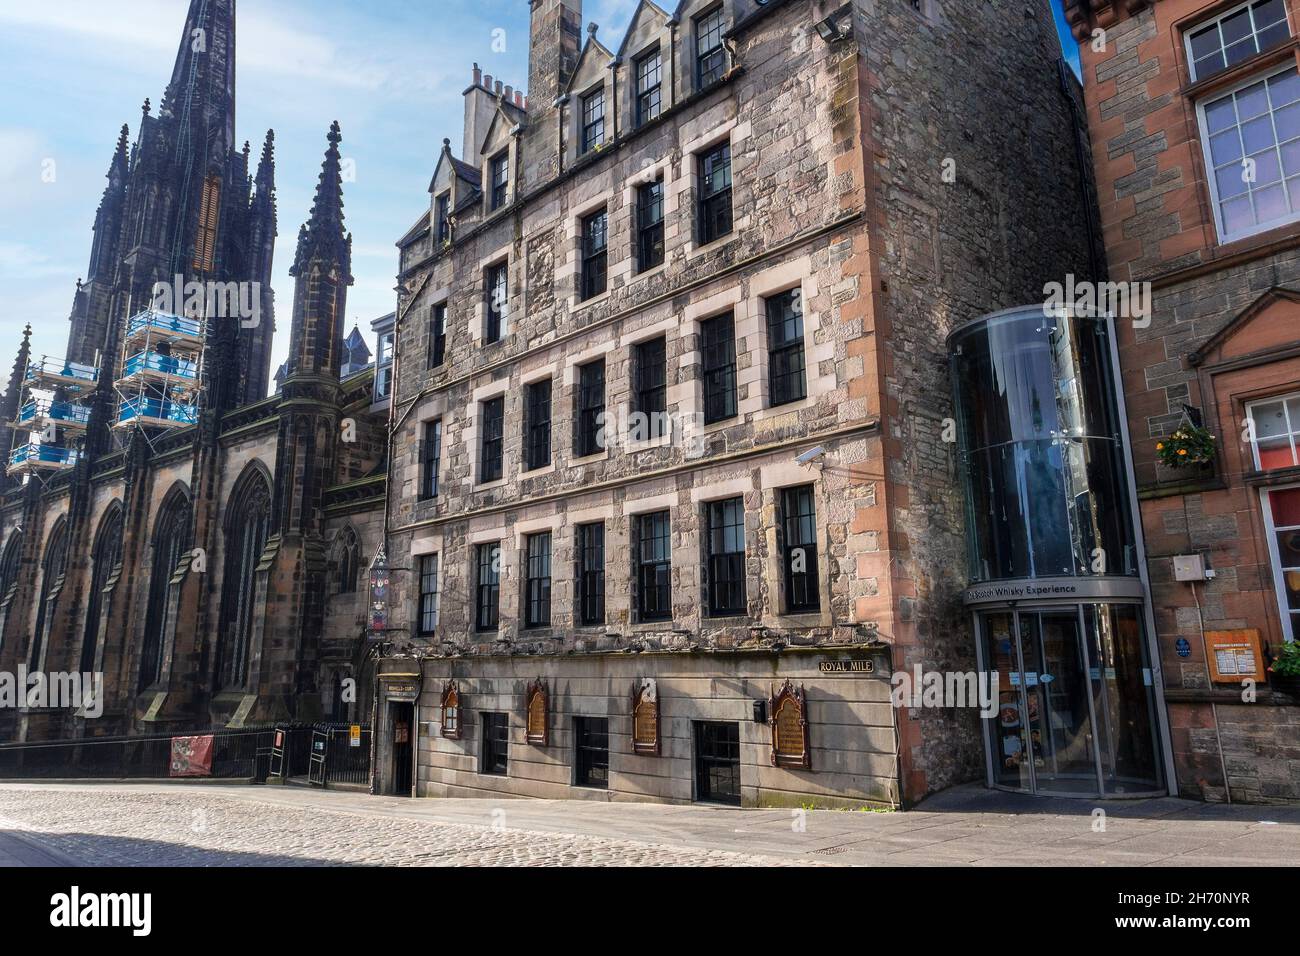 Boswells Court, The Witchery Restaurant And Scotch Whisky Expierence Royal Mile Edinburgh Old Town Scotland Tolbooth Kirk Stock Photo